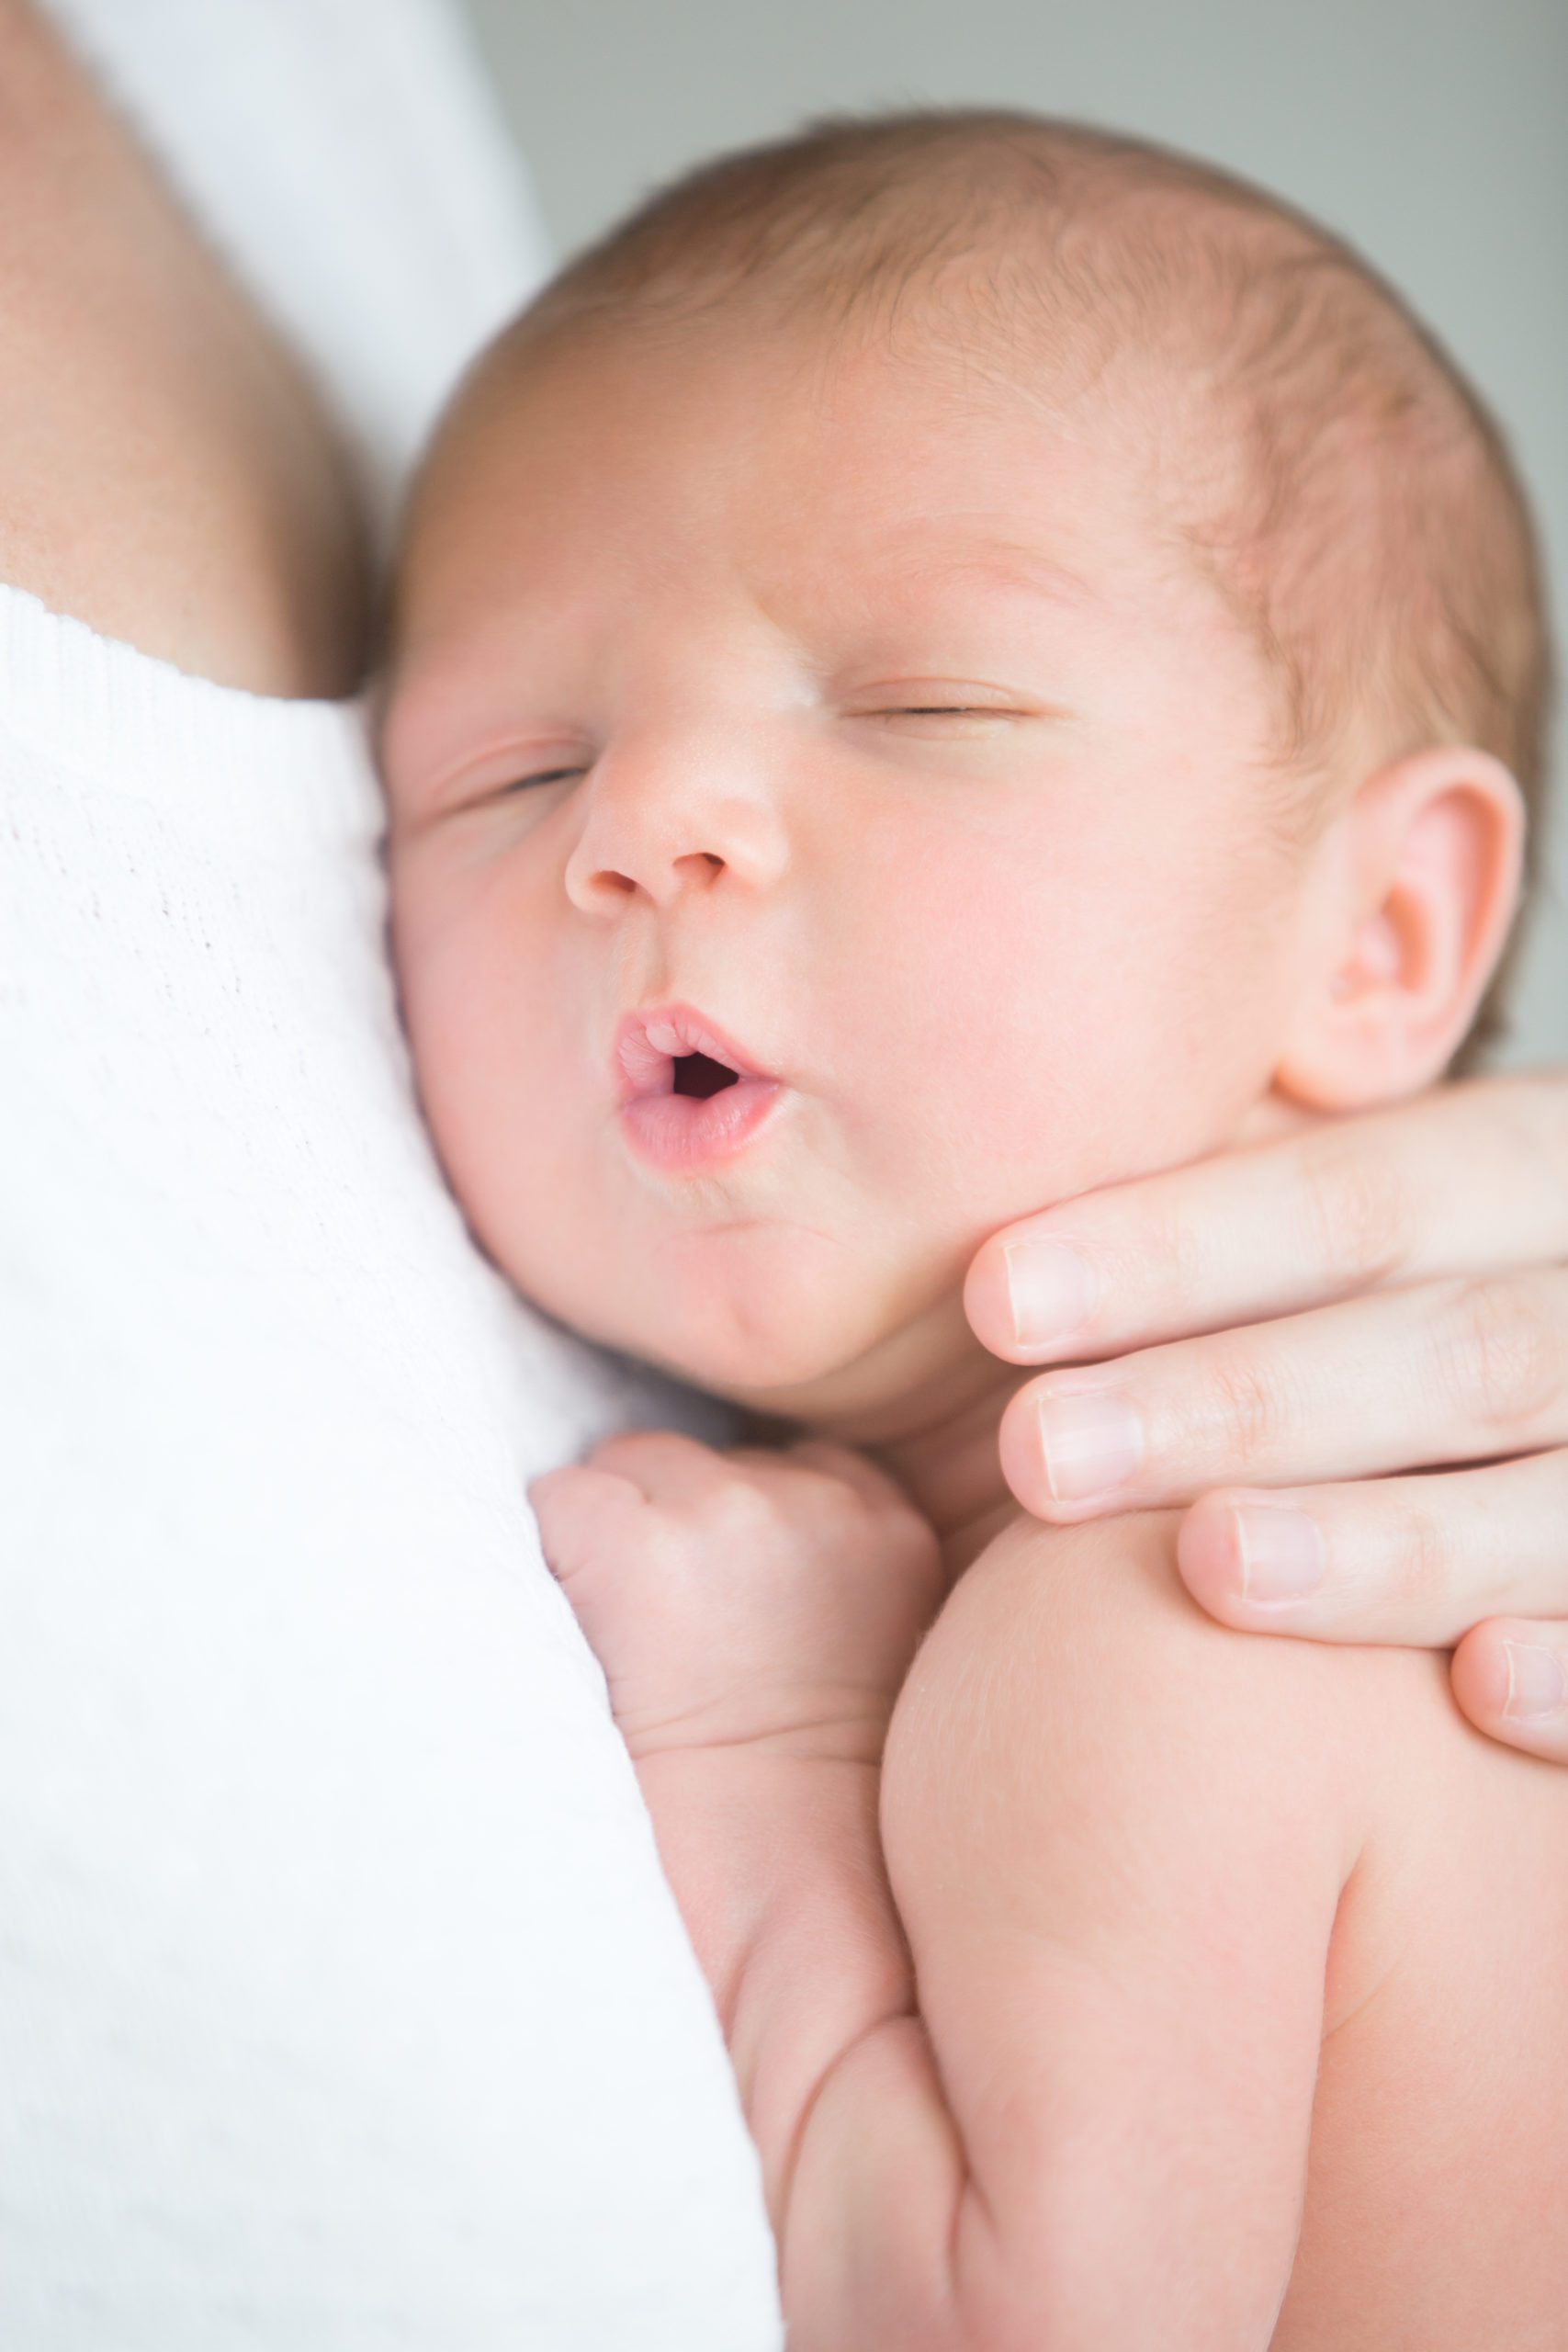 Portrait of a cute newborn hold at mother s breast, his mouth open. Family, healthy birth concept photo, close up